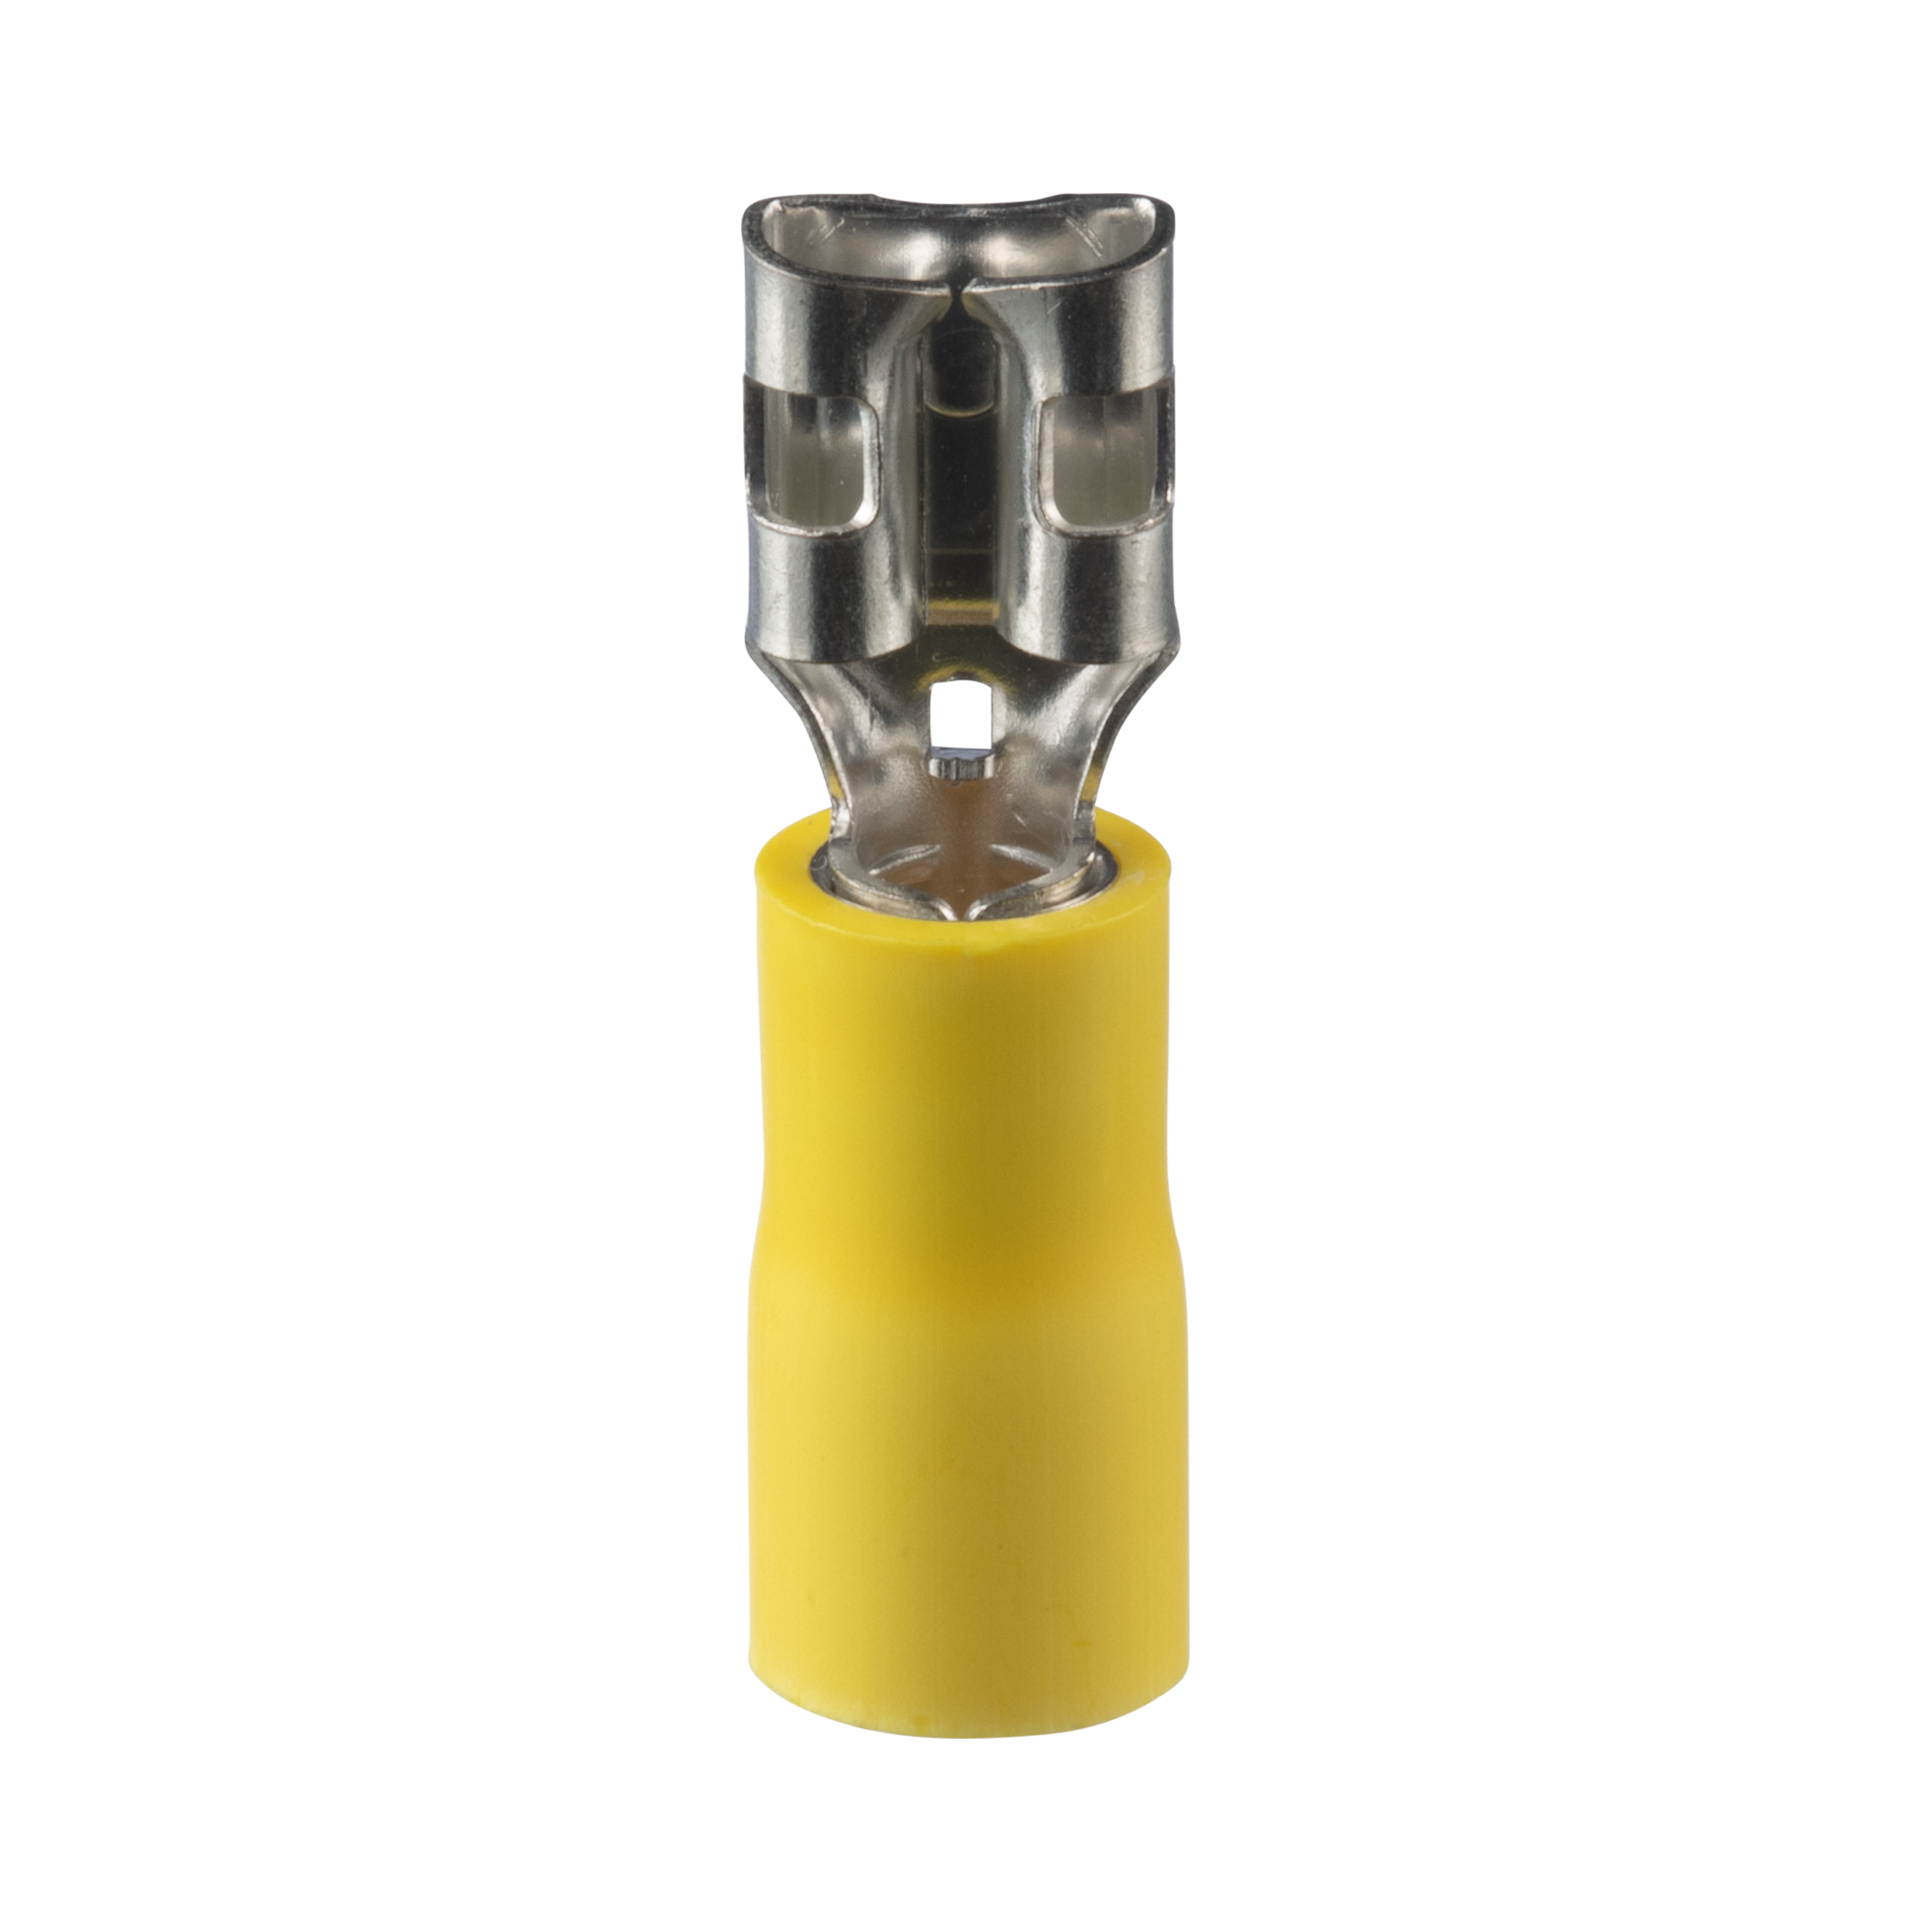 StrongHold™ EDV10-250-Q Disconnect, Yellow, Vinyl 0.13"x1.03"x0.3", 12-10 AWG